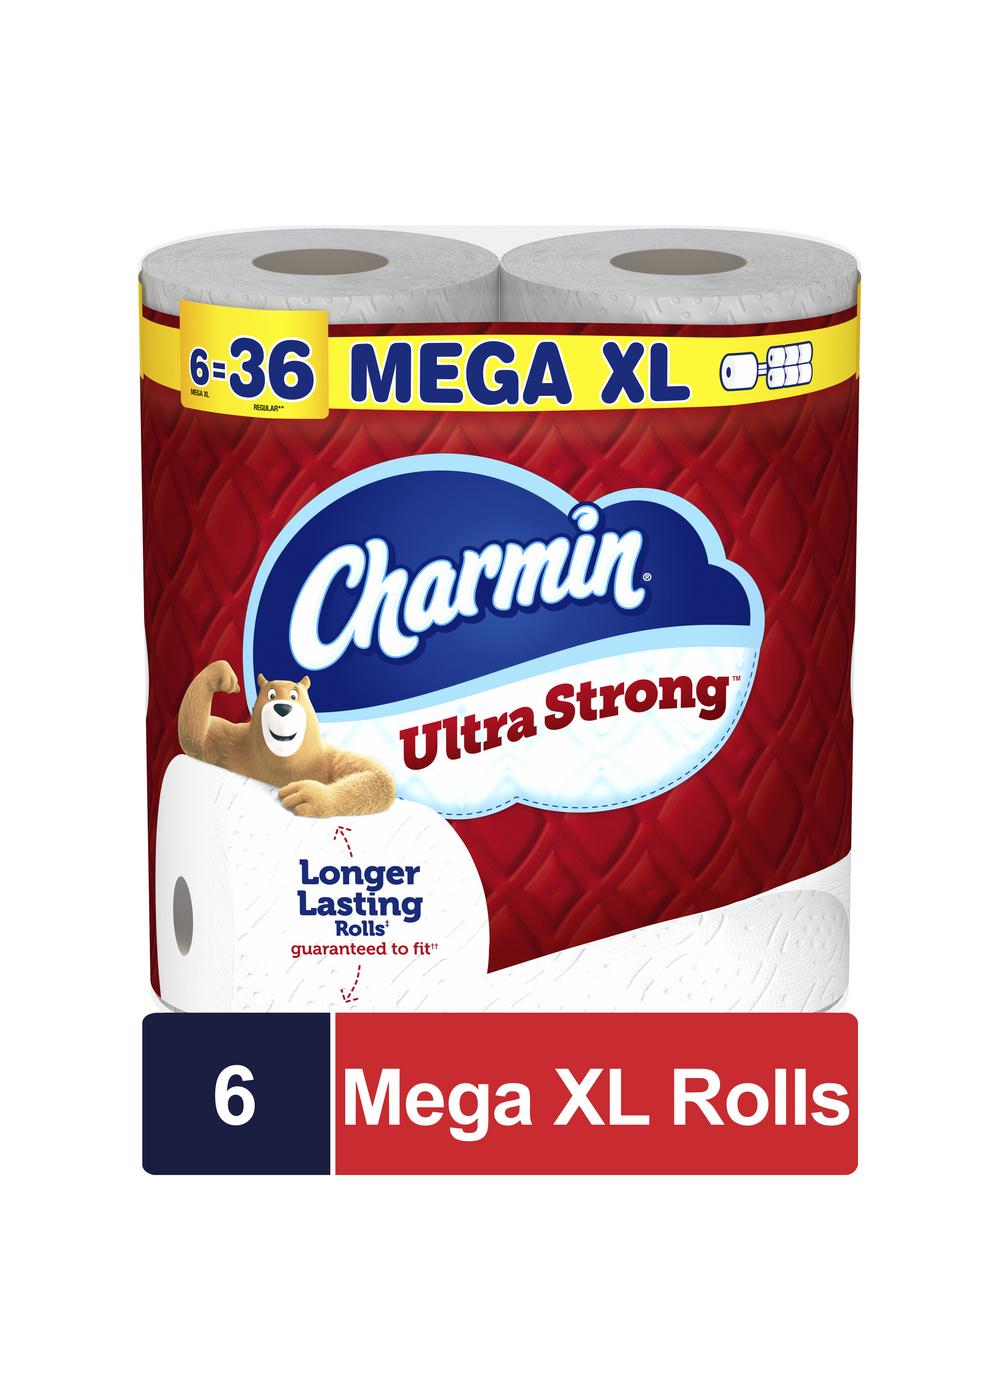 Charmin Ultra Strong Toilet Paper; image 5 of 6